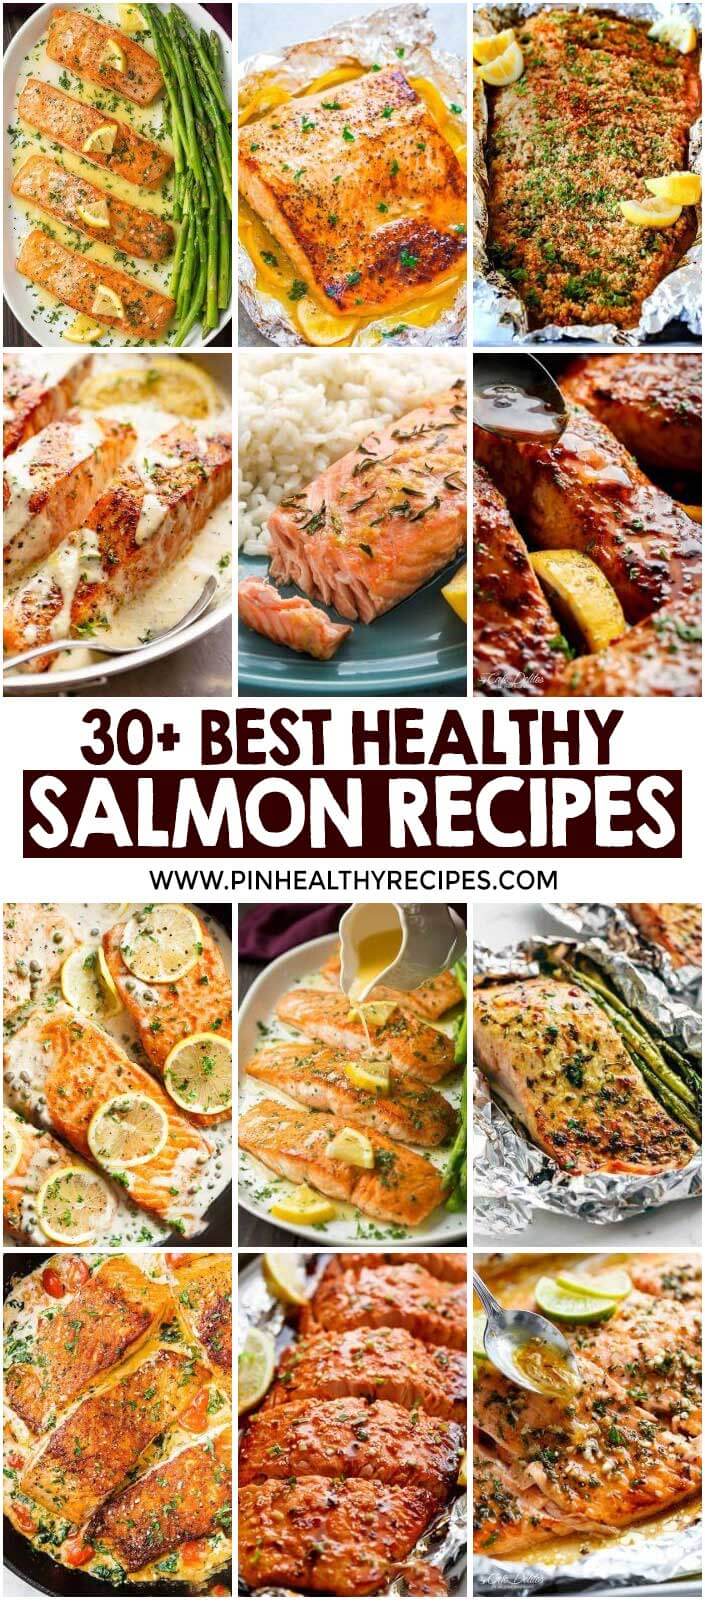 Top-Rated Salmon Recipes For Your Dinner